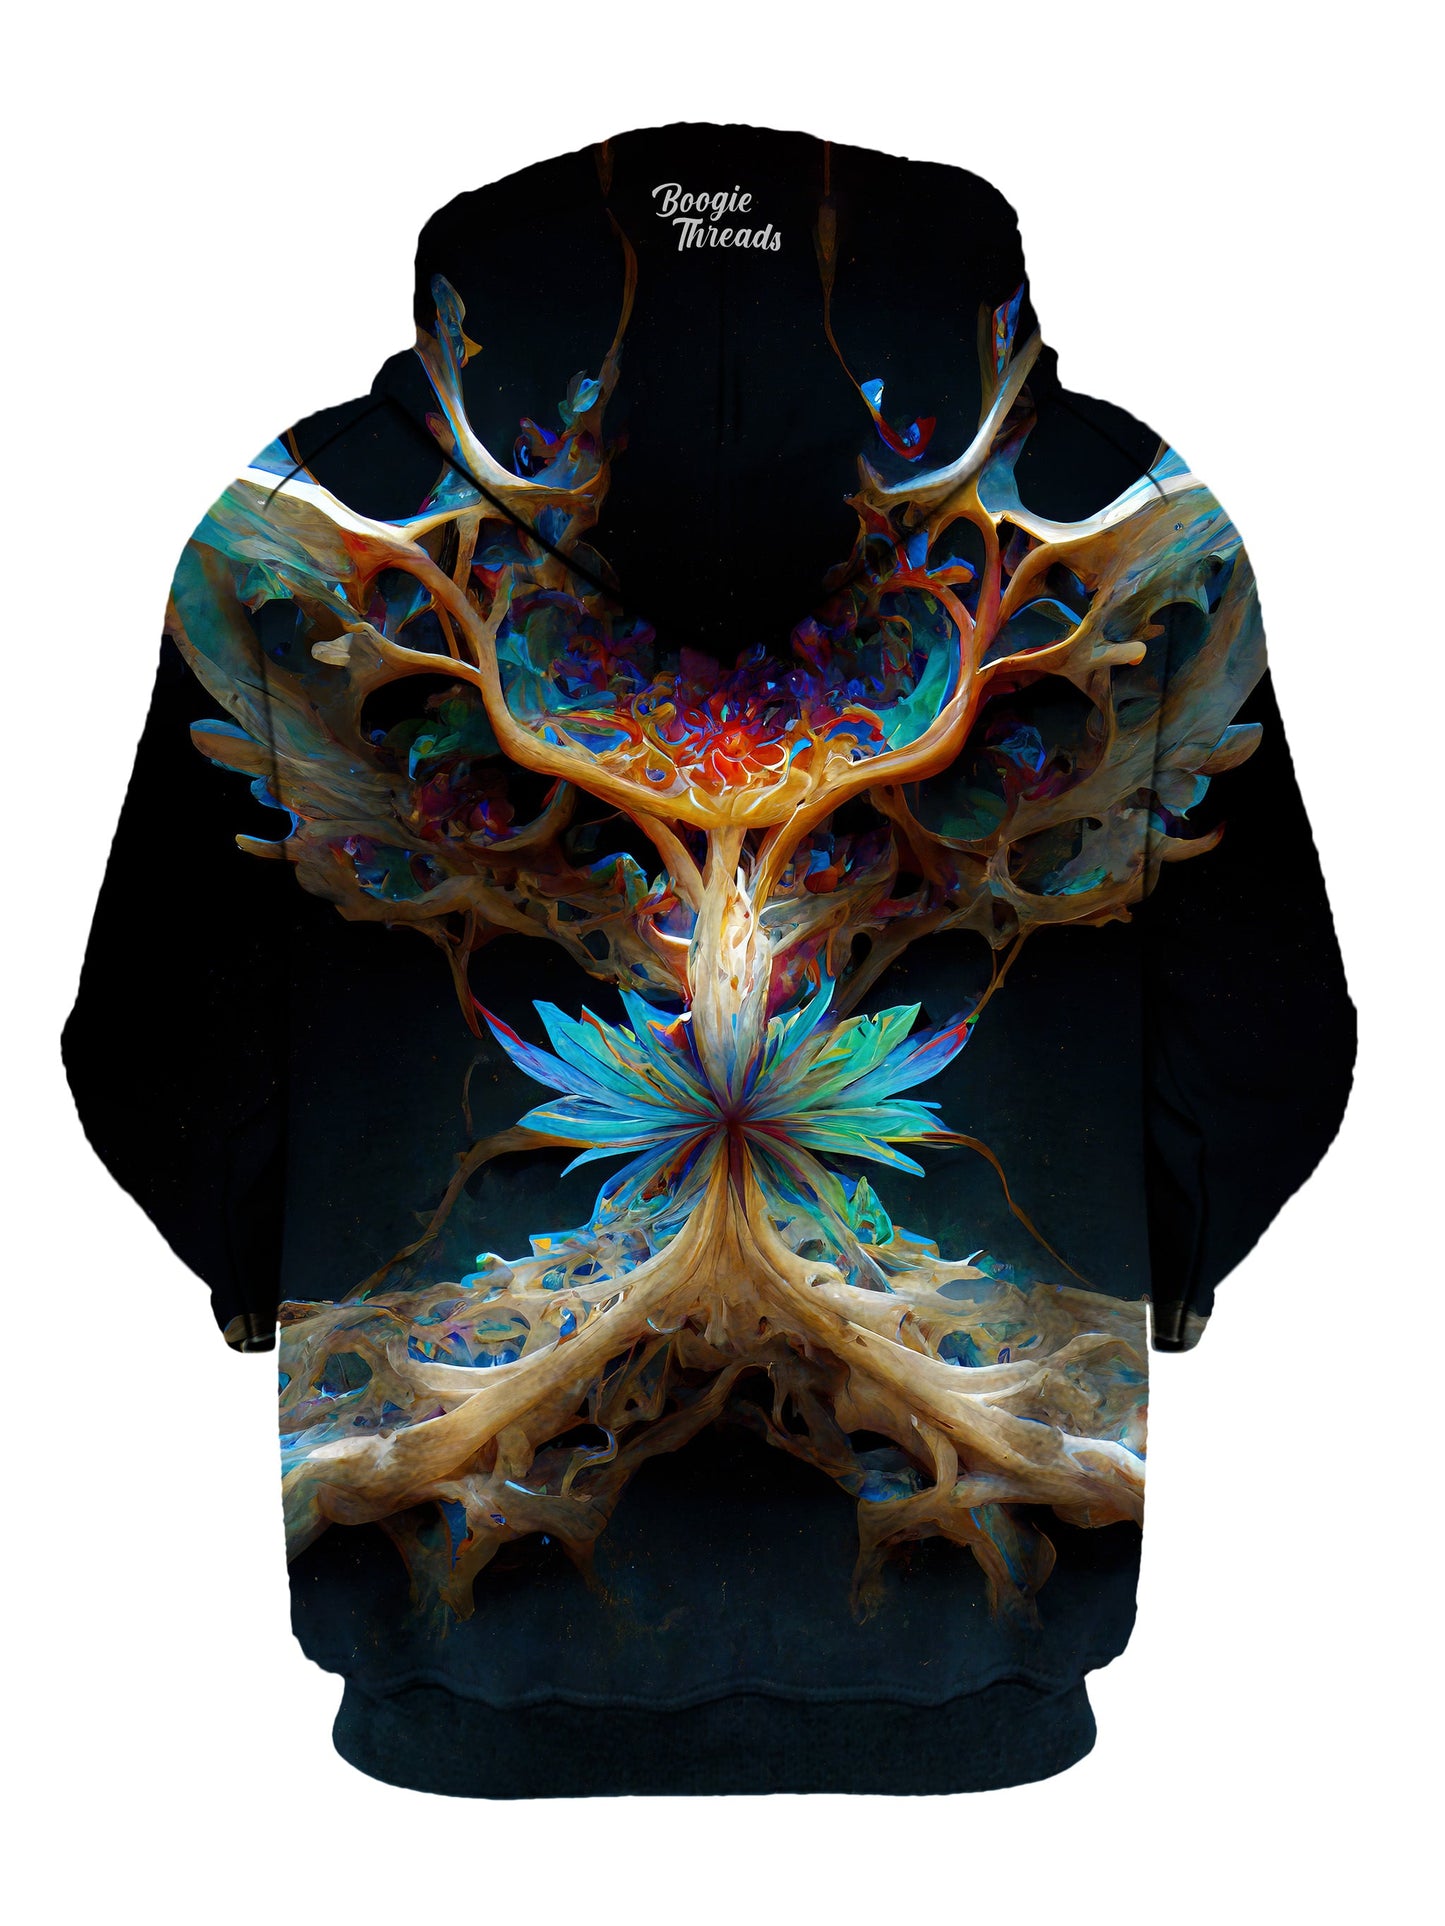 Carefree Luxury Unisex Pullover Hoodie - EDM Festival Clothing - Boogie Threads